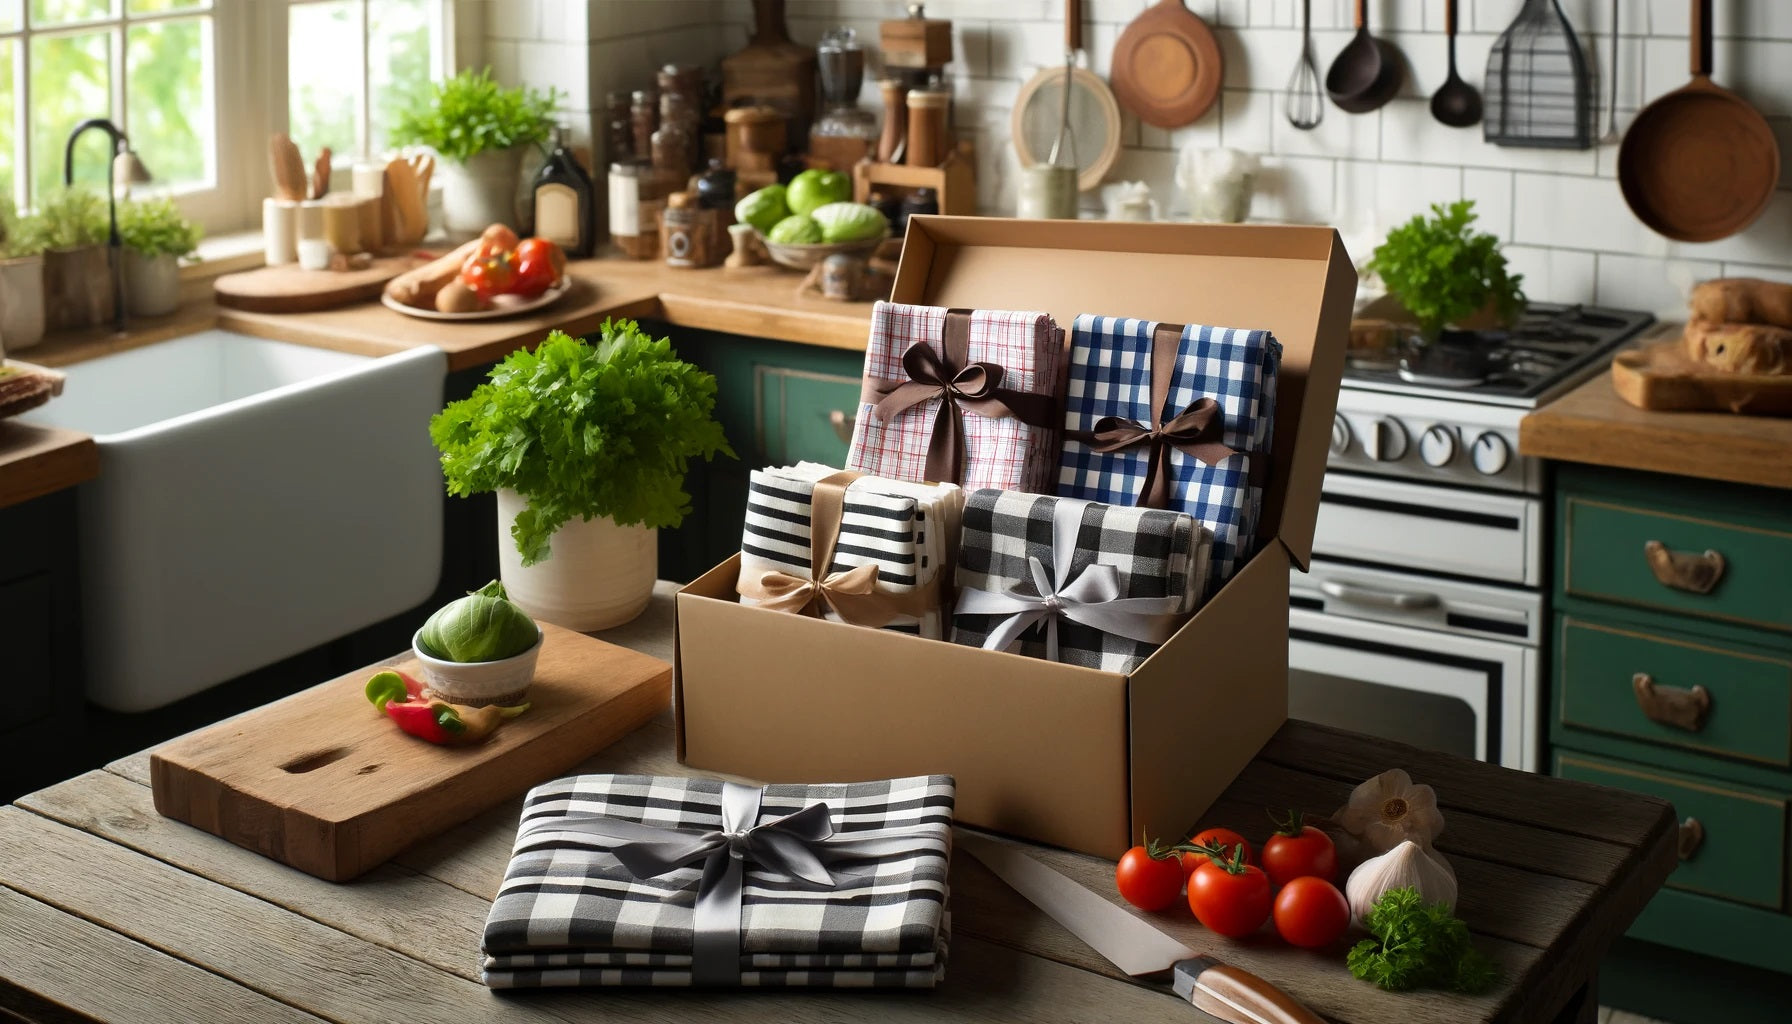 Checkered and striped cotton kitchen towels as a gift, displayed in a well-organized kitchen with a rustic wooden cutting board and decorative elements